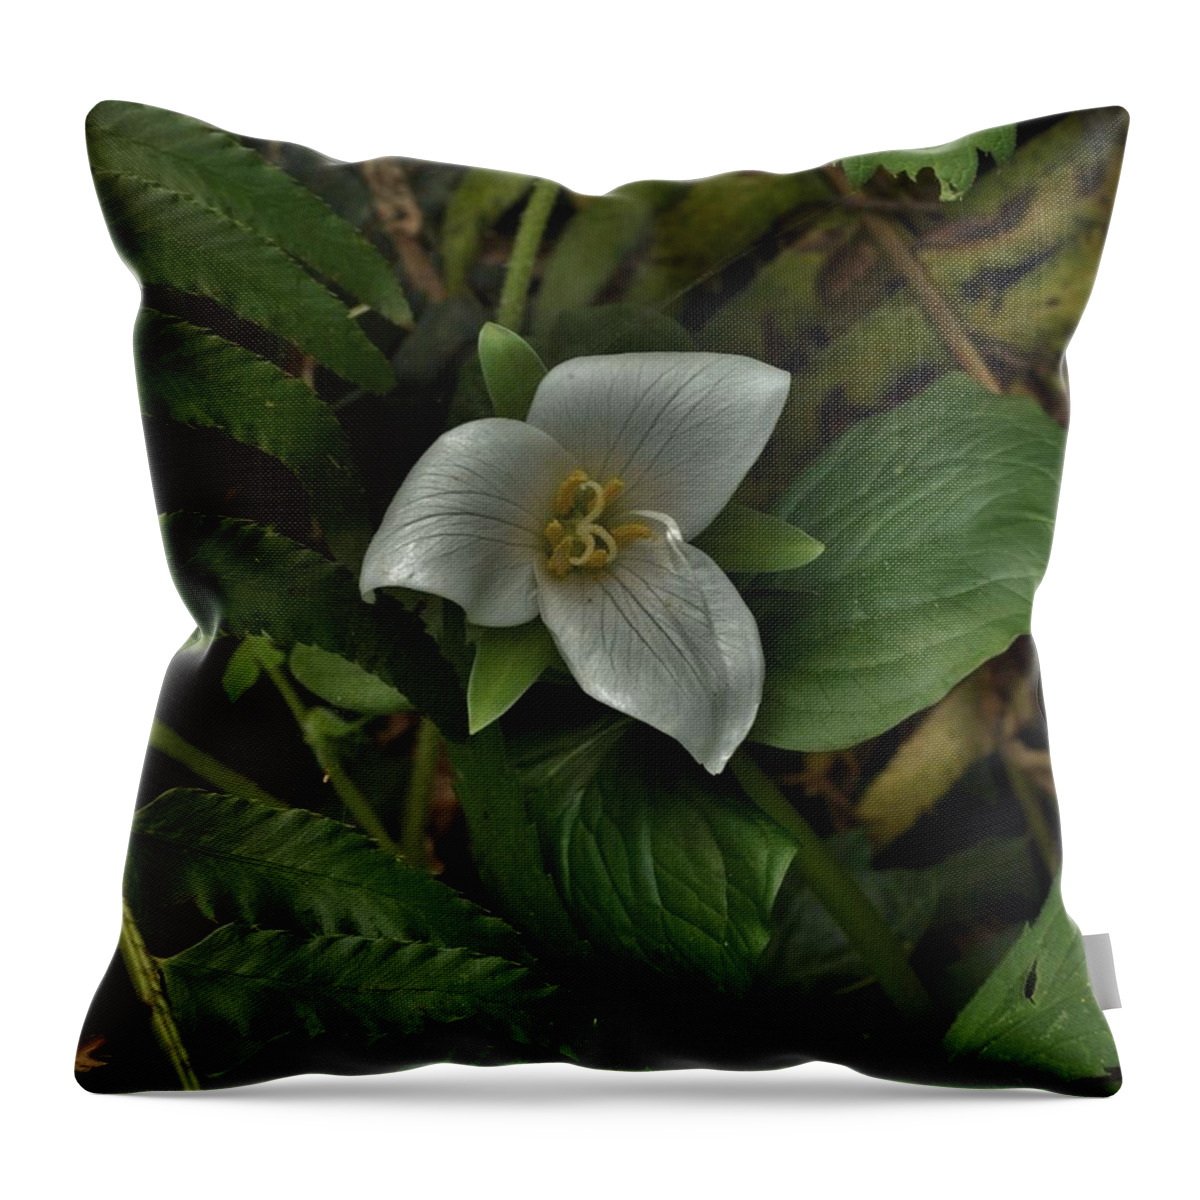 Flowers Throw Pillow featuring the photograph The Gentle Trillium by Charles Lucas